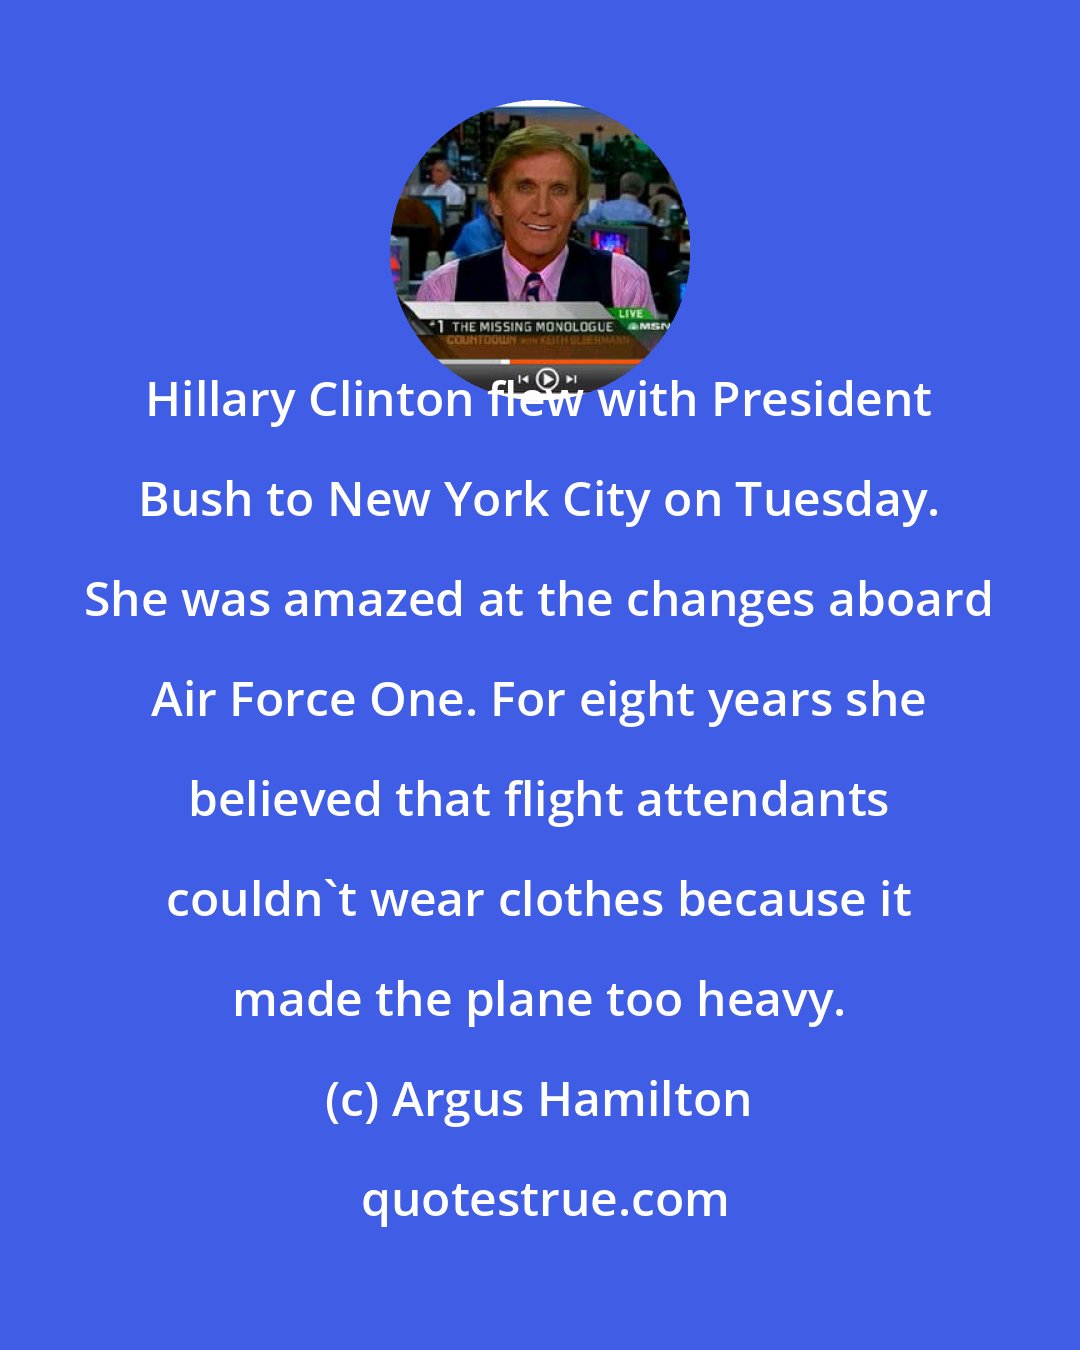 Argus Hamilton: Hillary Clinton flew with President Bush to New York City on Tuesday. She was amazed at the changes aboard Air Force One. For eight years she believed that flight attendants couldn't wear clothes because it made the plane too heavy.